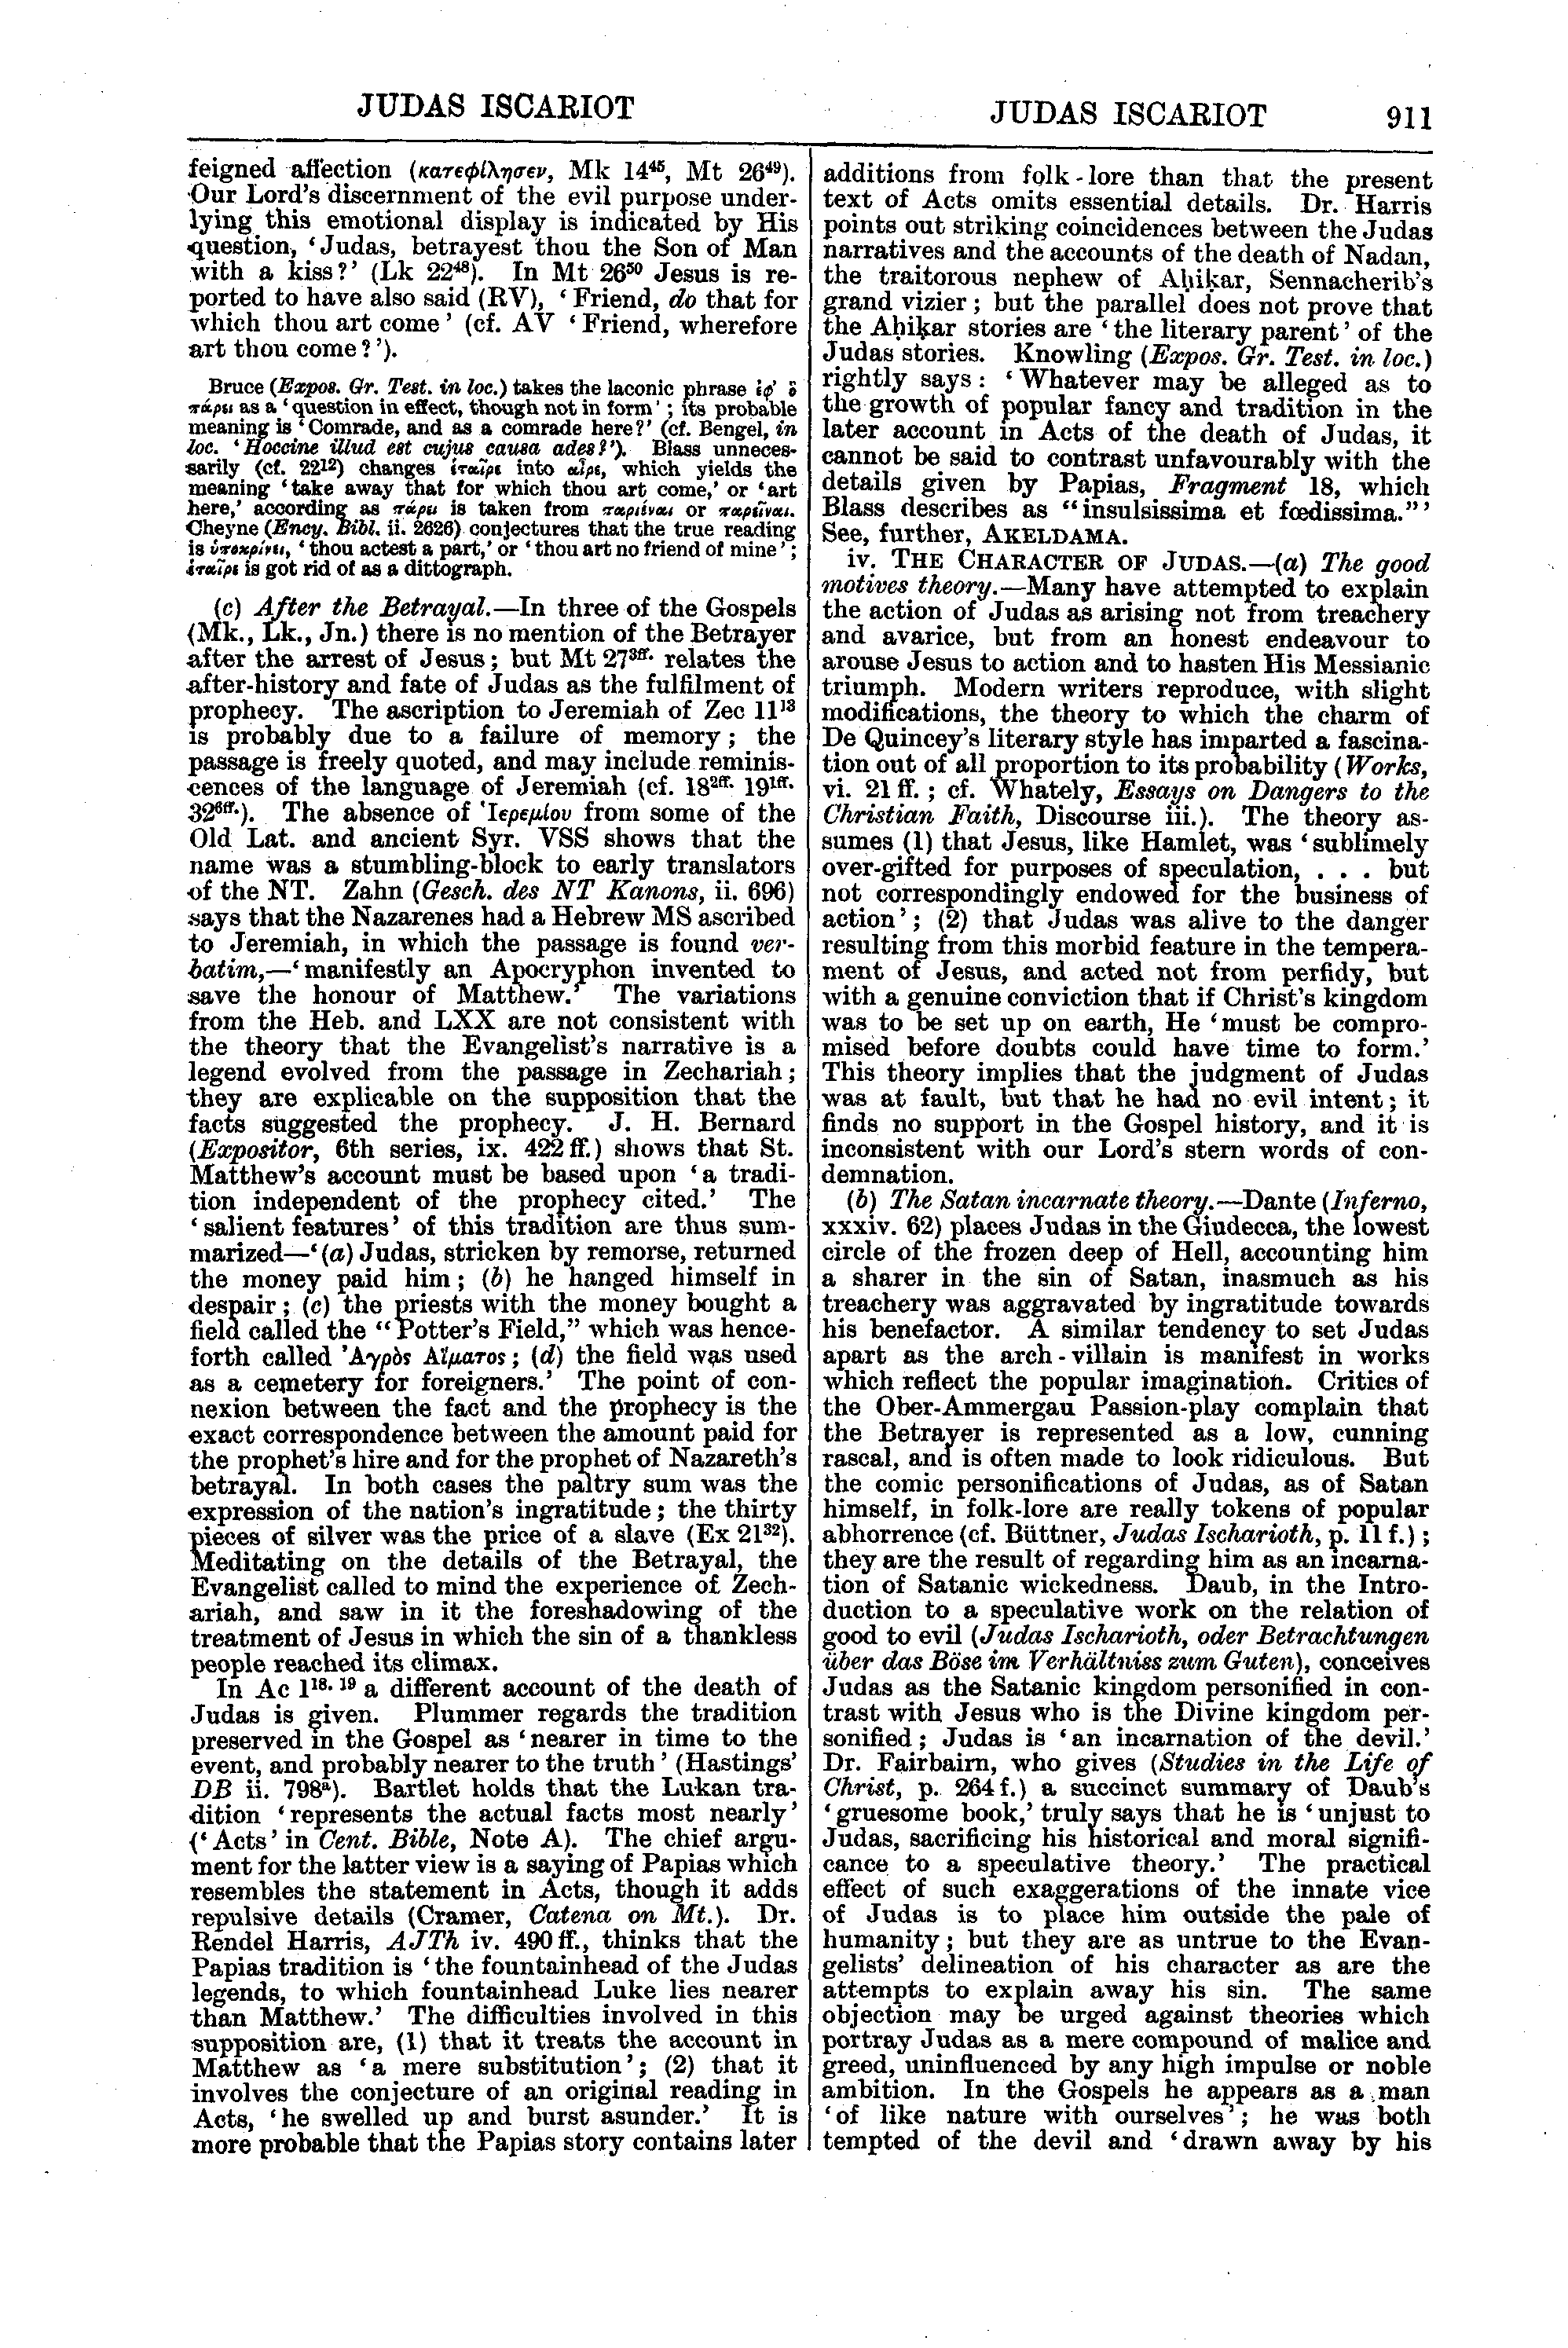 Image of page 911